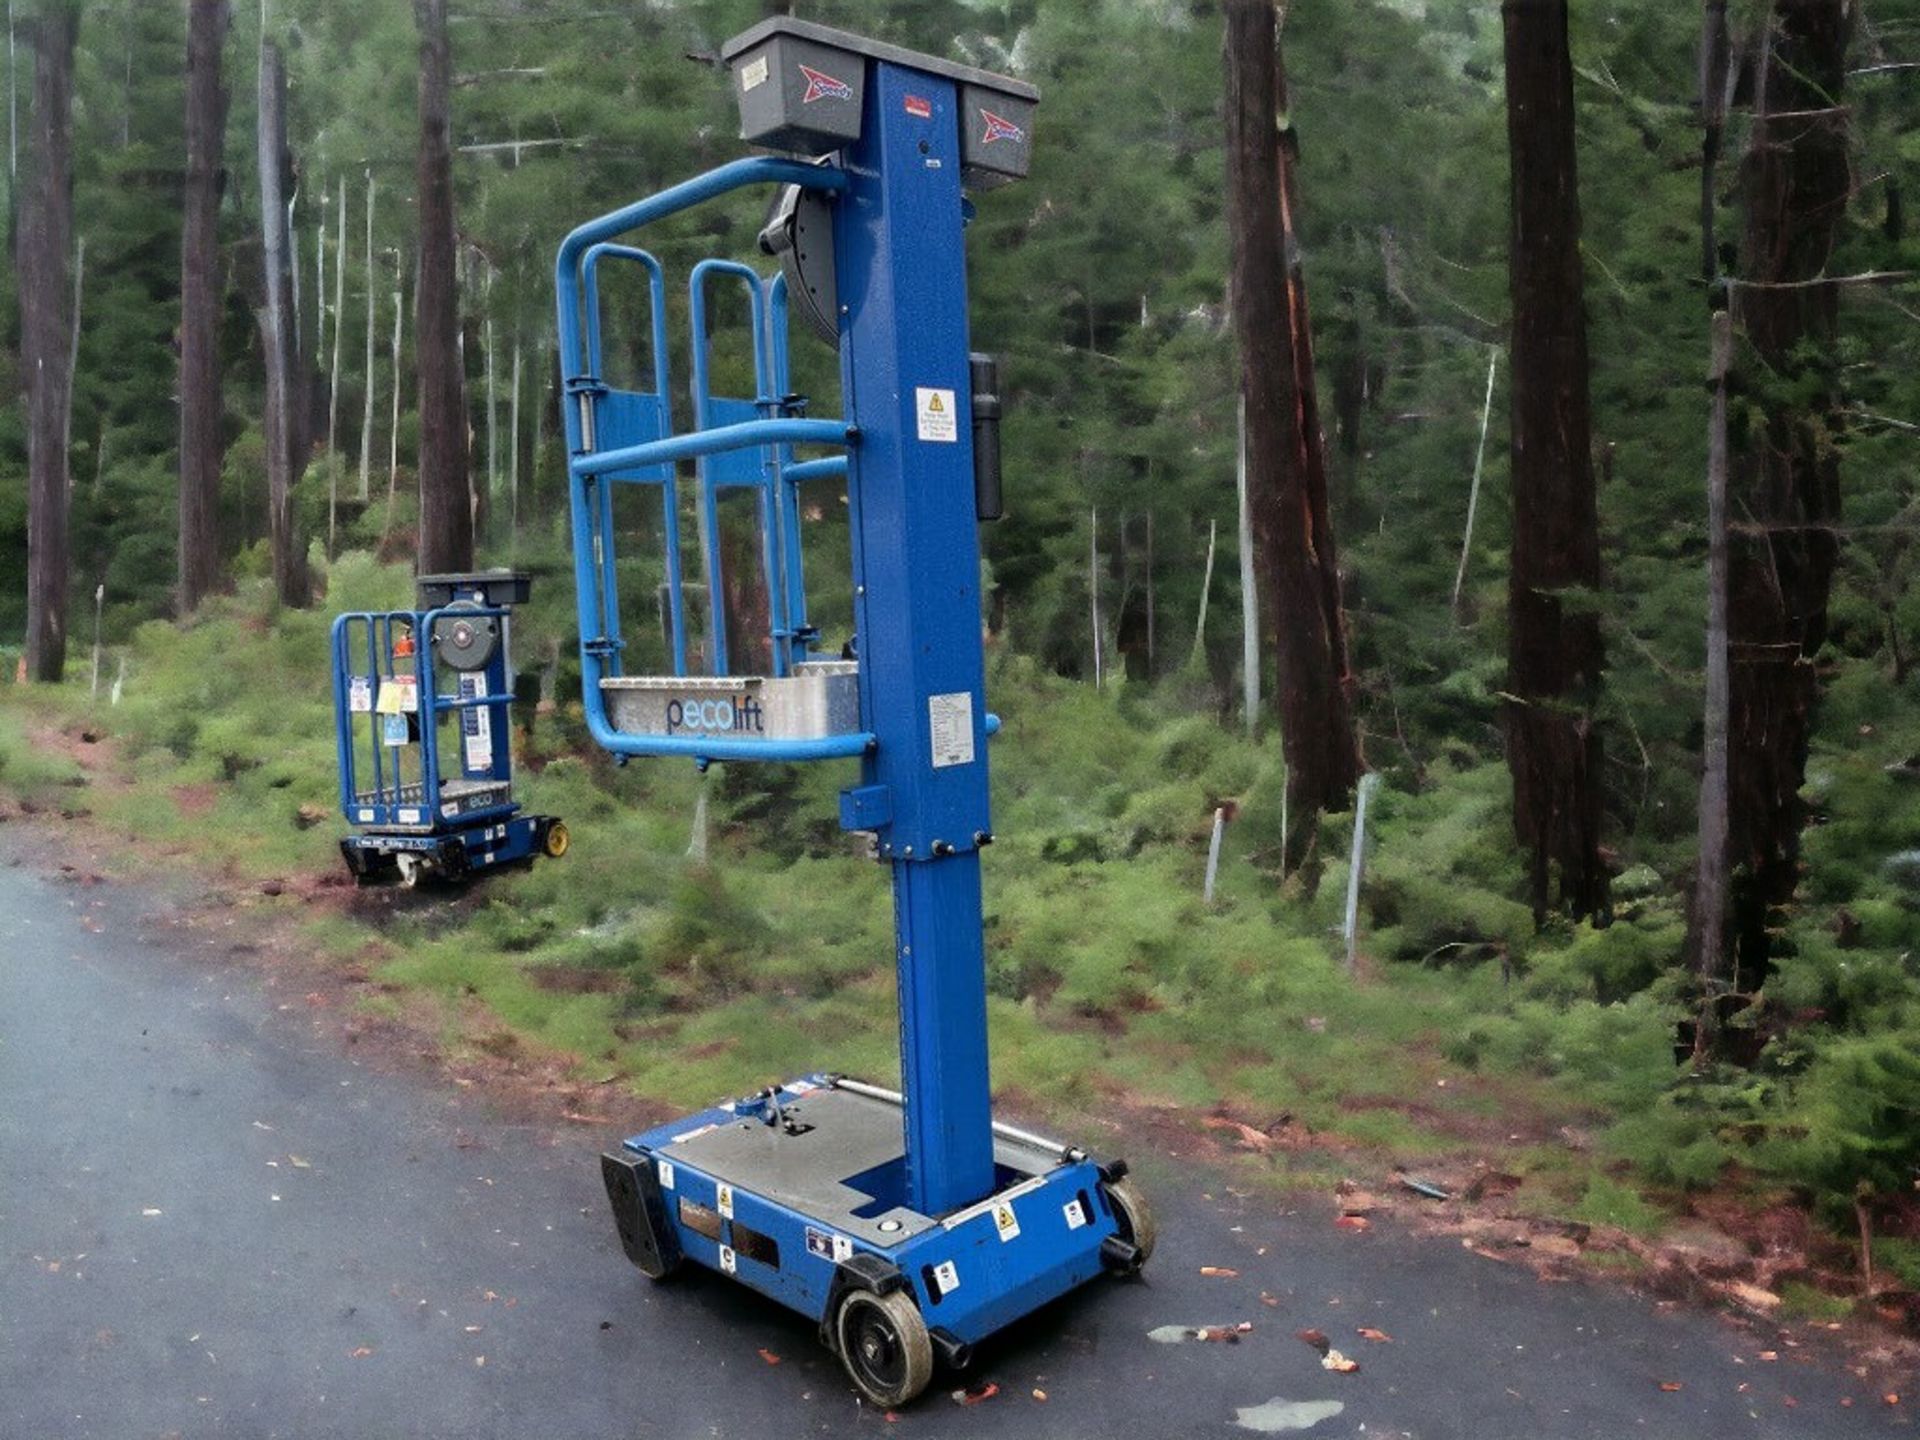 2018 POWER TOWER PECOLIFT PUSH AROUND LIFT - IDEAL FOR VERSATILE INDOOR PROJECTS - Image 3 of 8